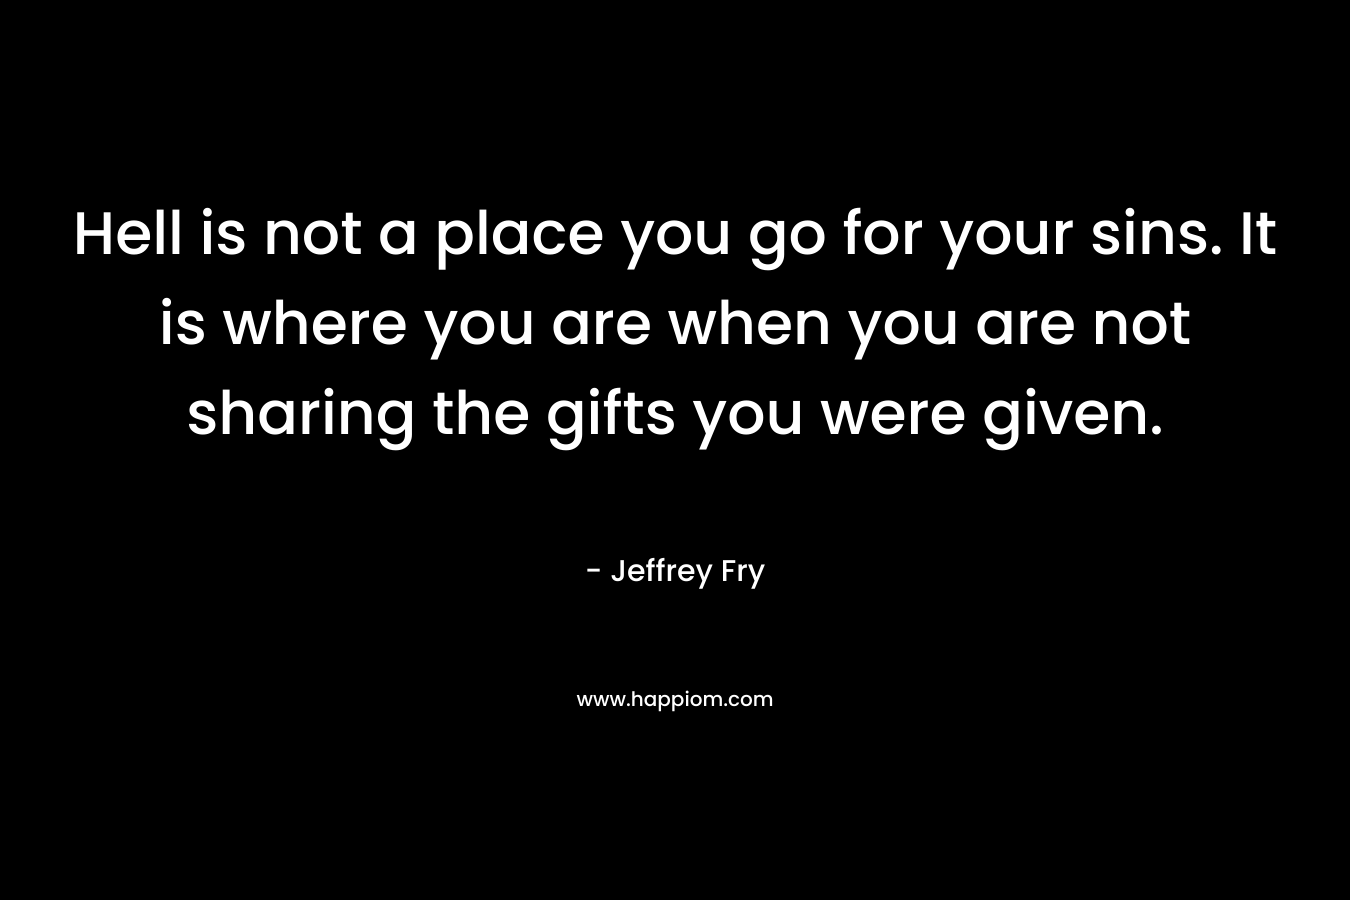 Hell is not a place you go for your sins. It is where you are when you are not sharing the gifts you were given. – Jeffrey Fry